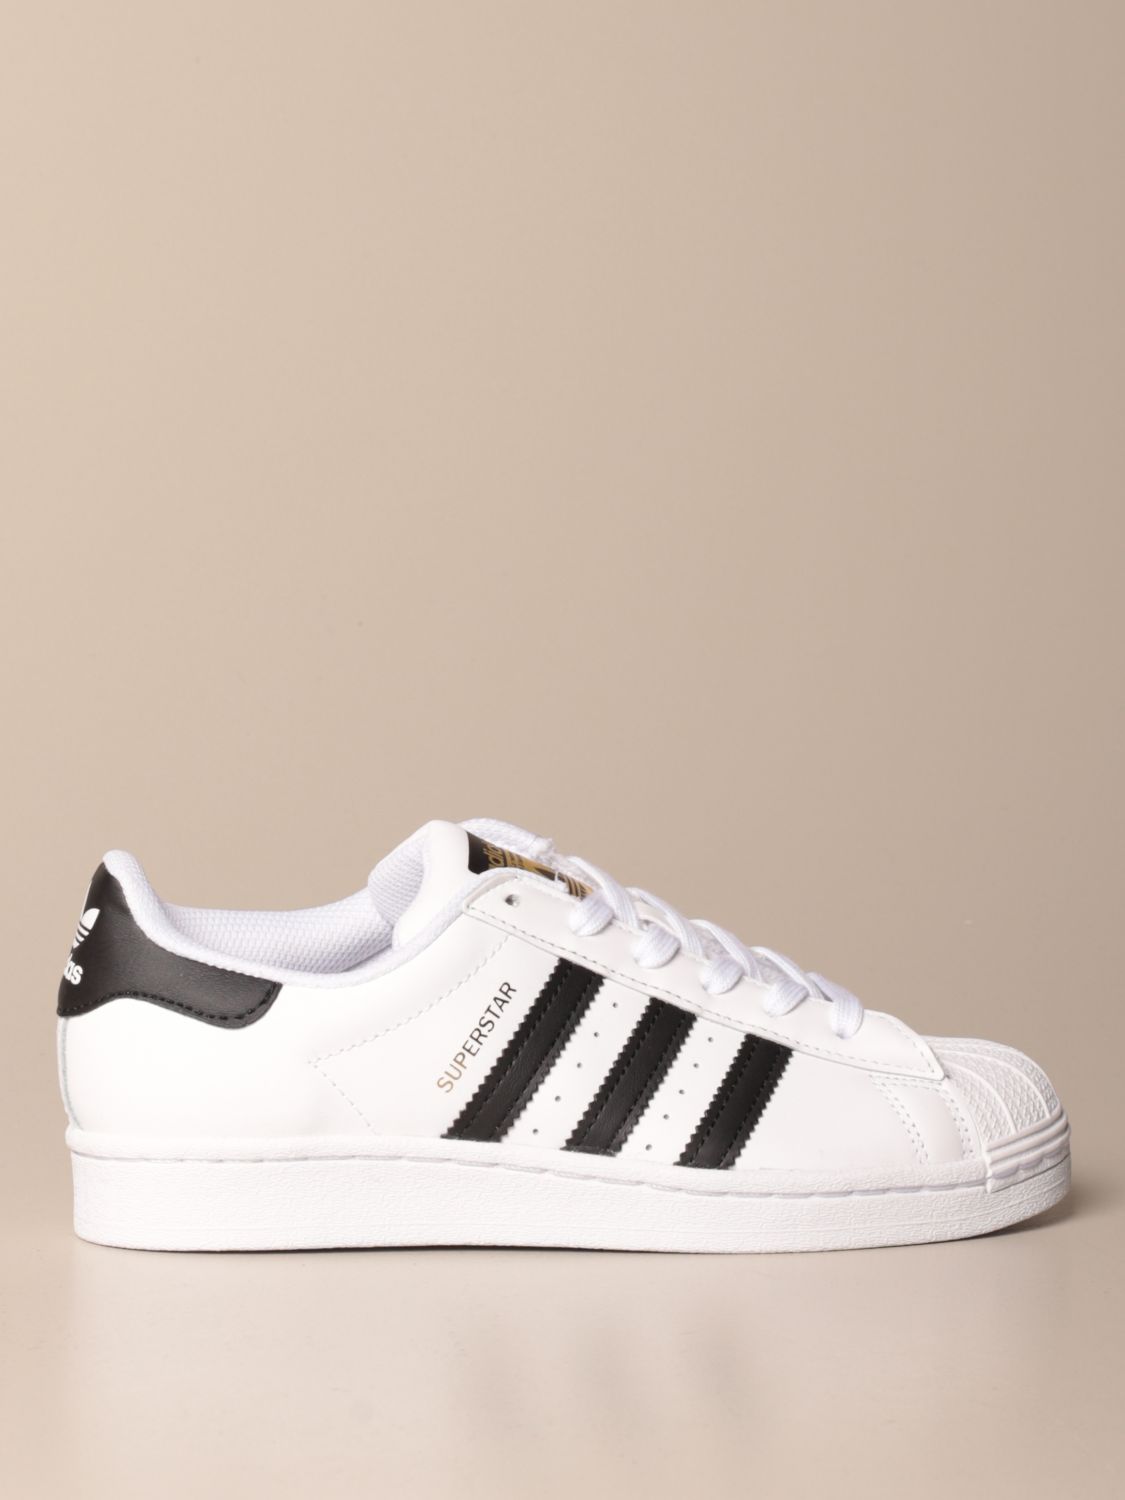 adidas leather shoes